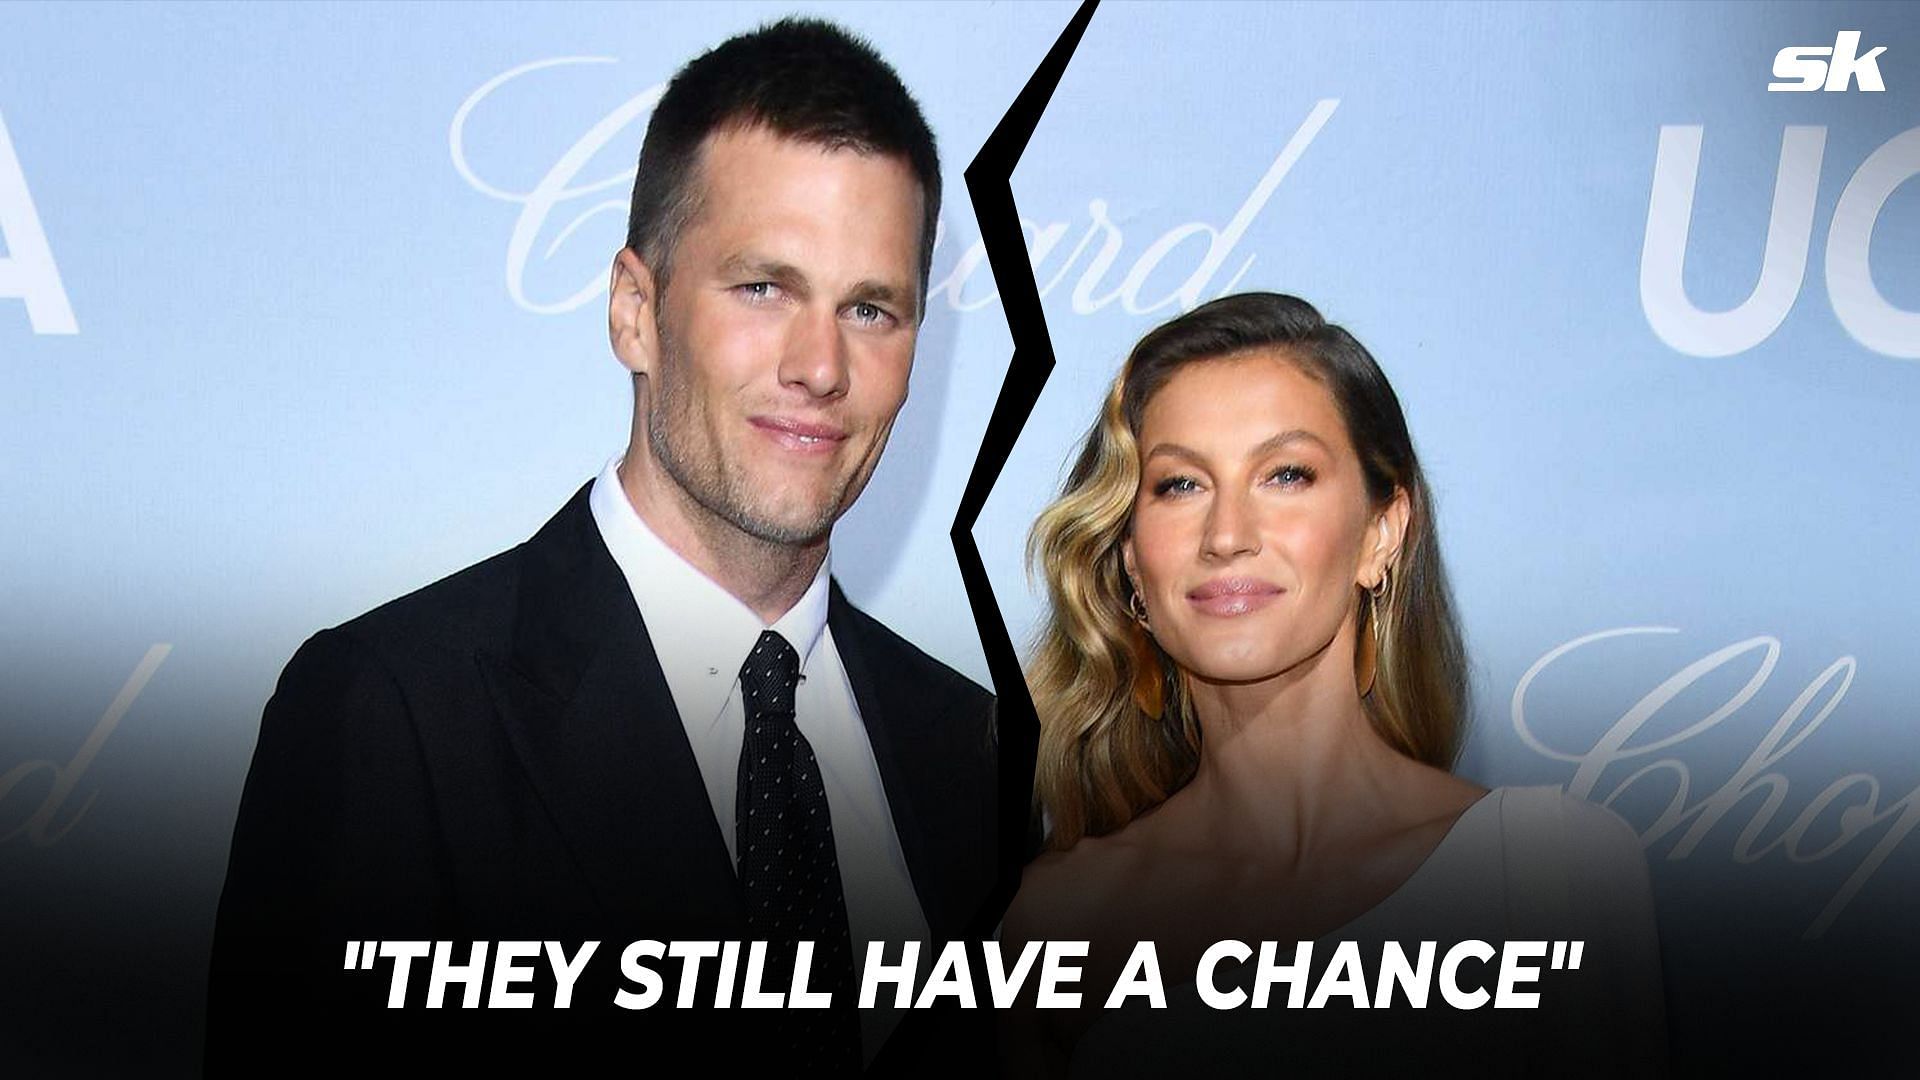 Tom Brady and Gisele Bundchen recently filed for a divorce after 13 years of marriage